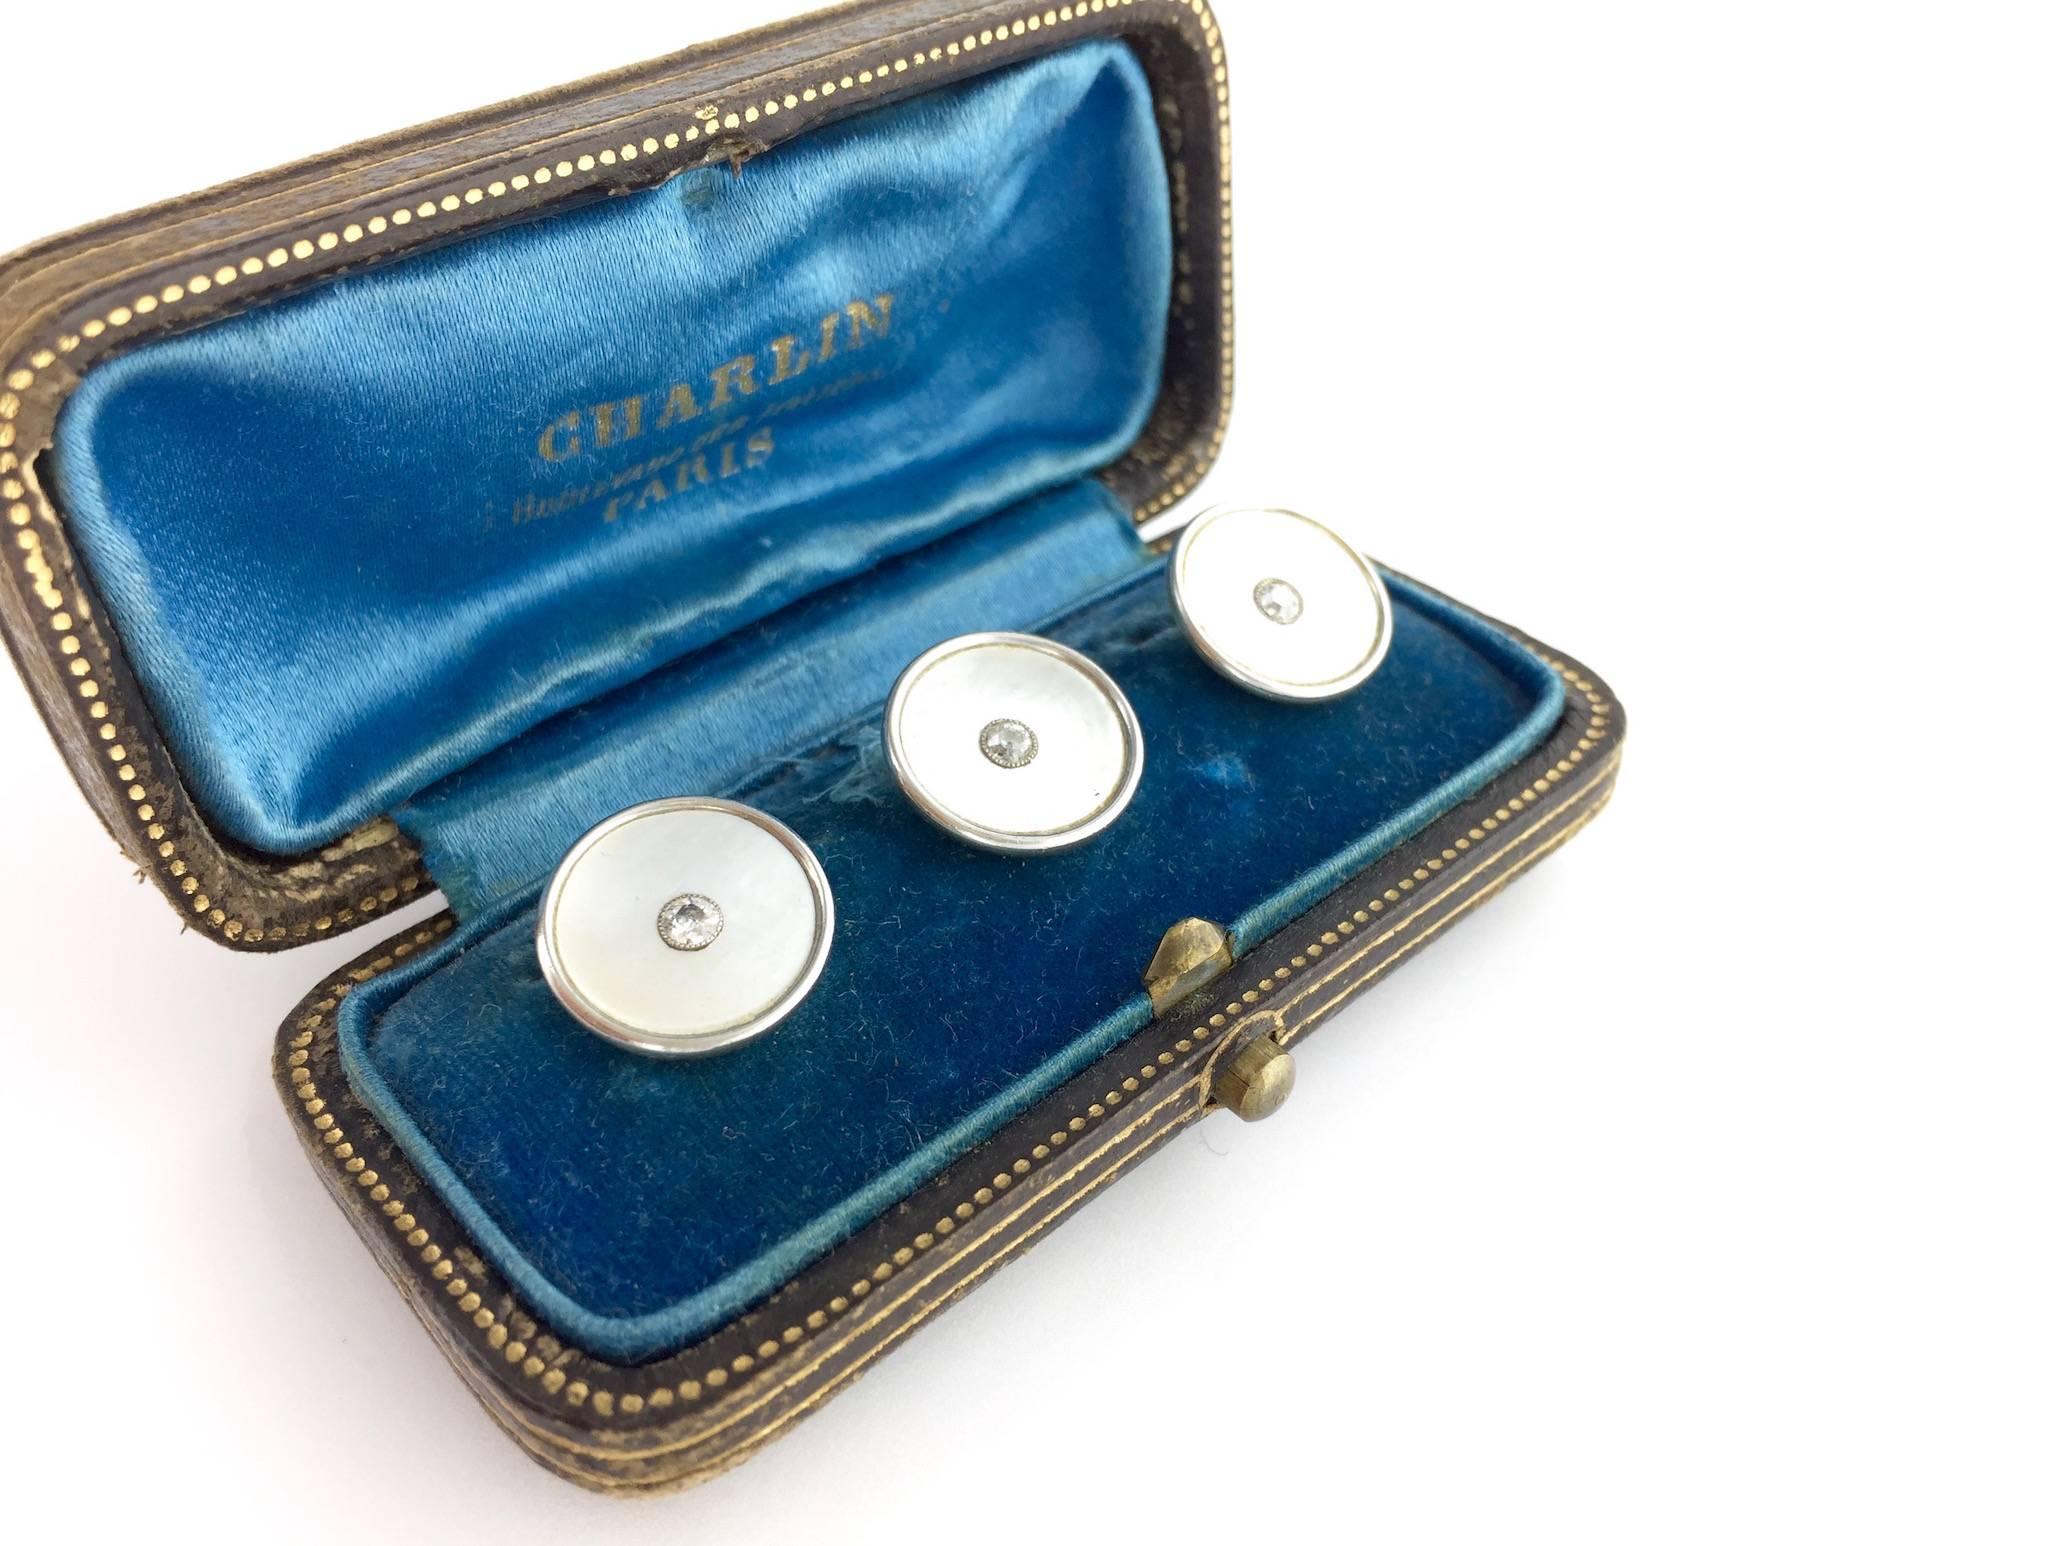 Very Elegant Mother-of-Pearl Three Buttons each one centered by Diamond on Platinum and yellow Gold.
Circa 1910.
Original box.

Gross weight: 4.36 grams.